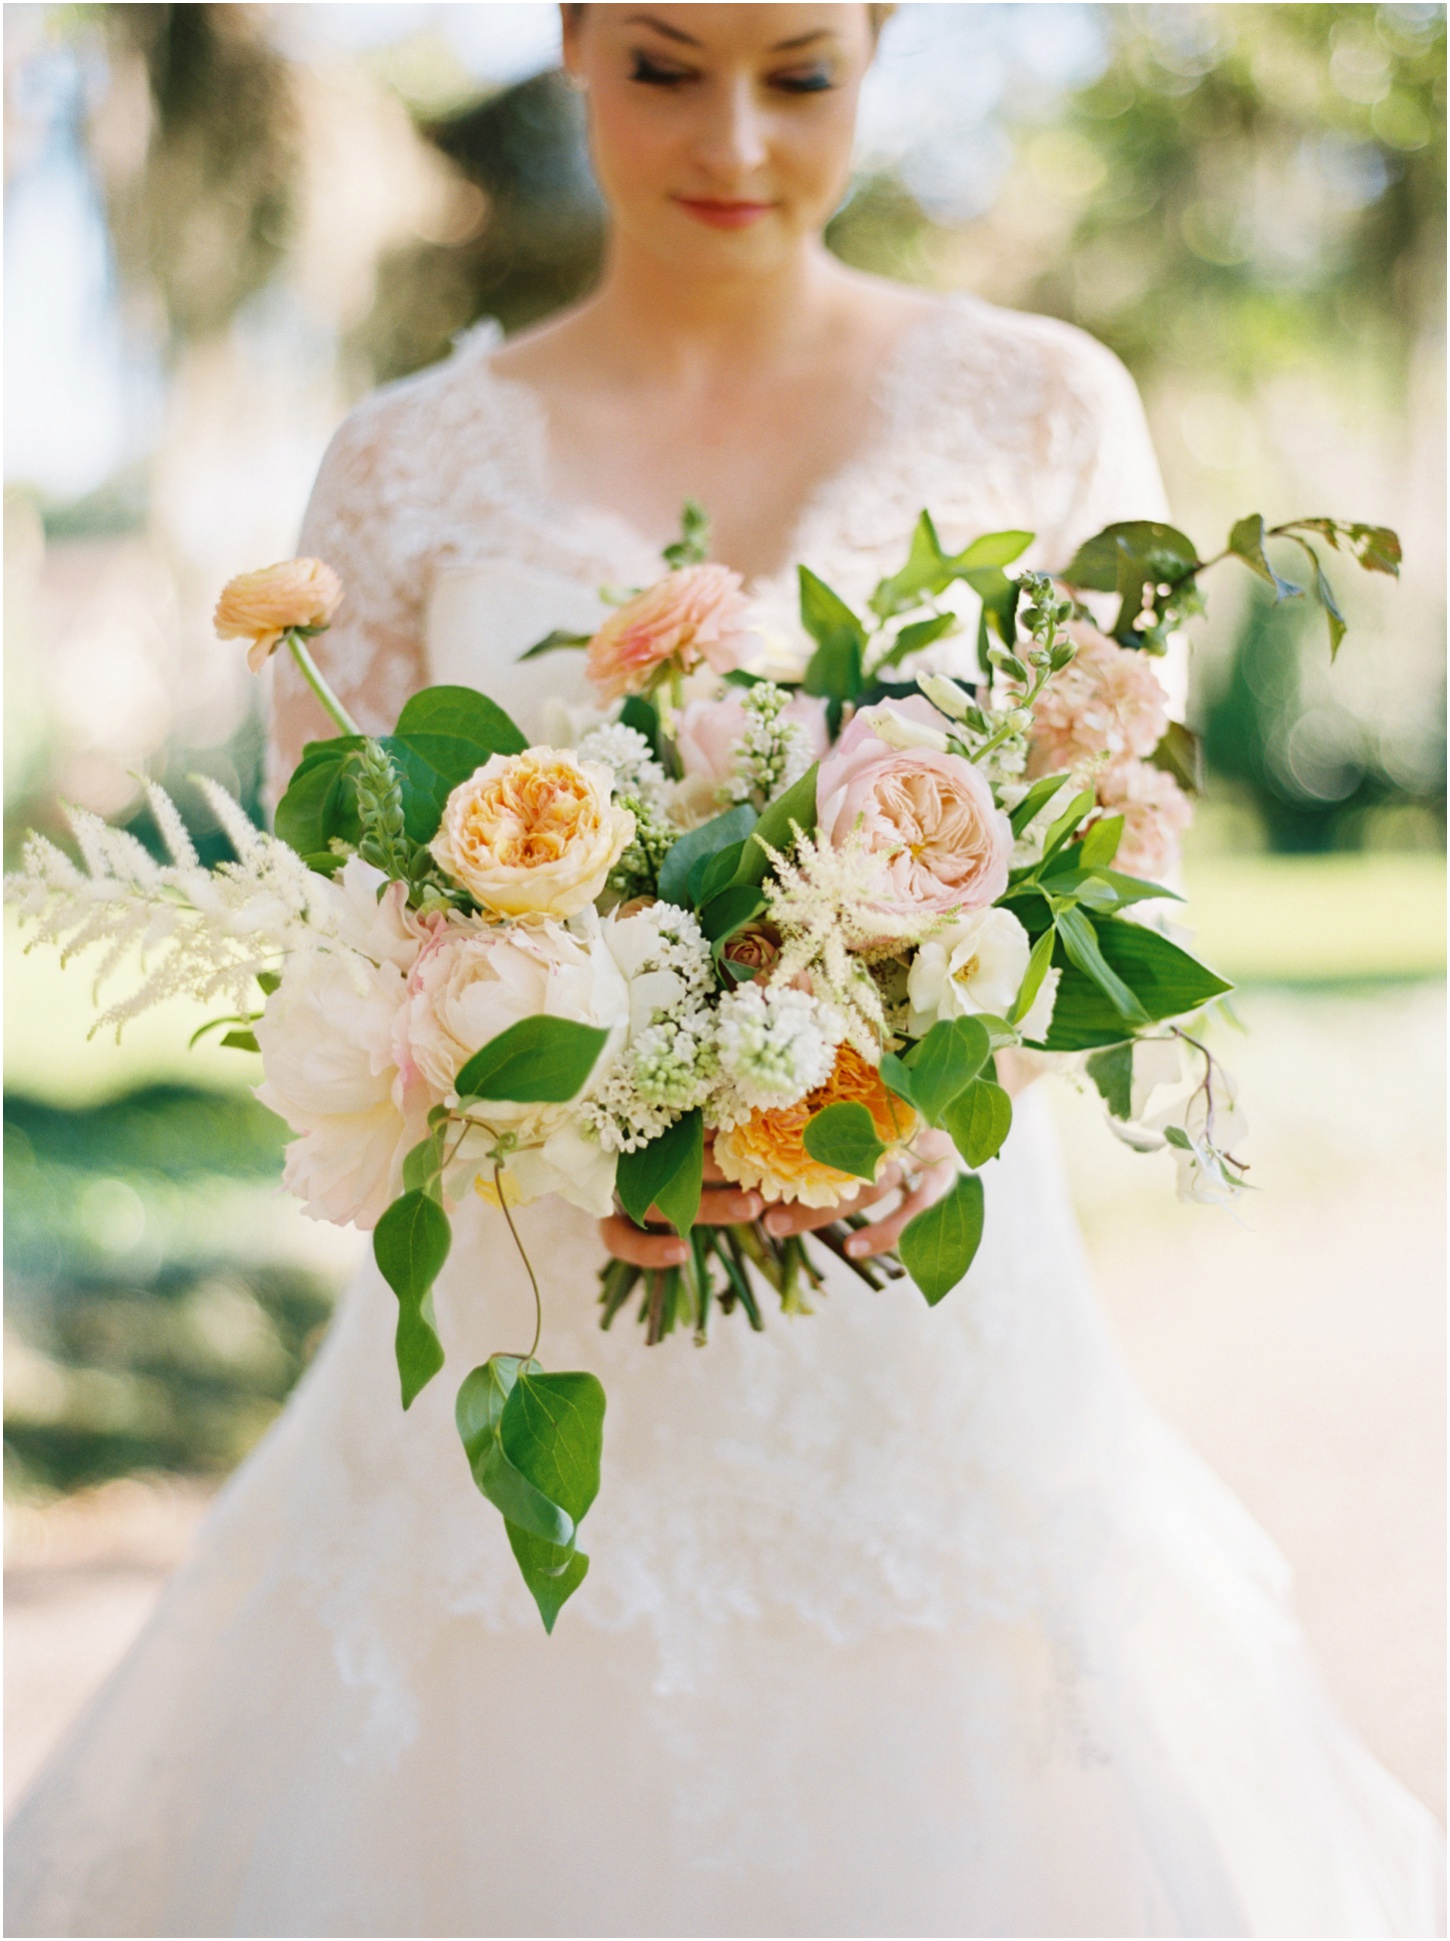 Mobile Country Club Wedding - Kristin Sweeting Photography, Holly Carlisle Florals